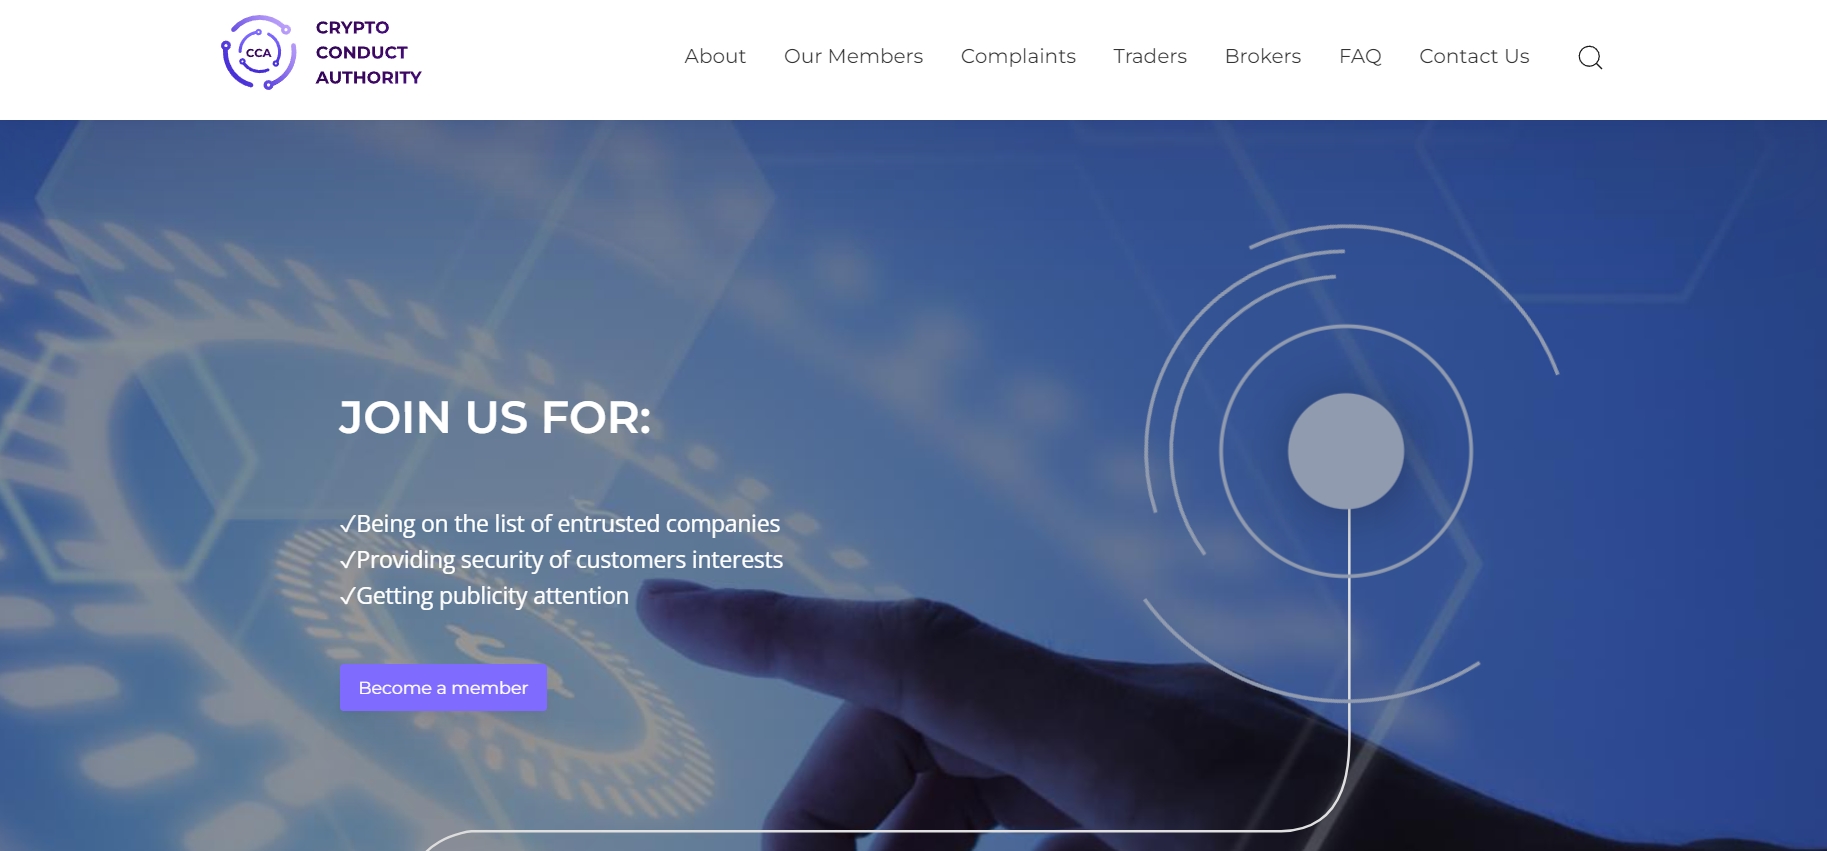 Crypto Conduct Authority homepage